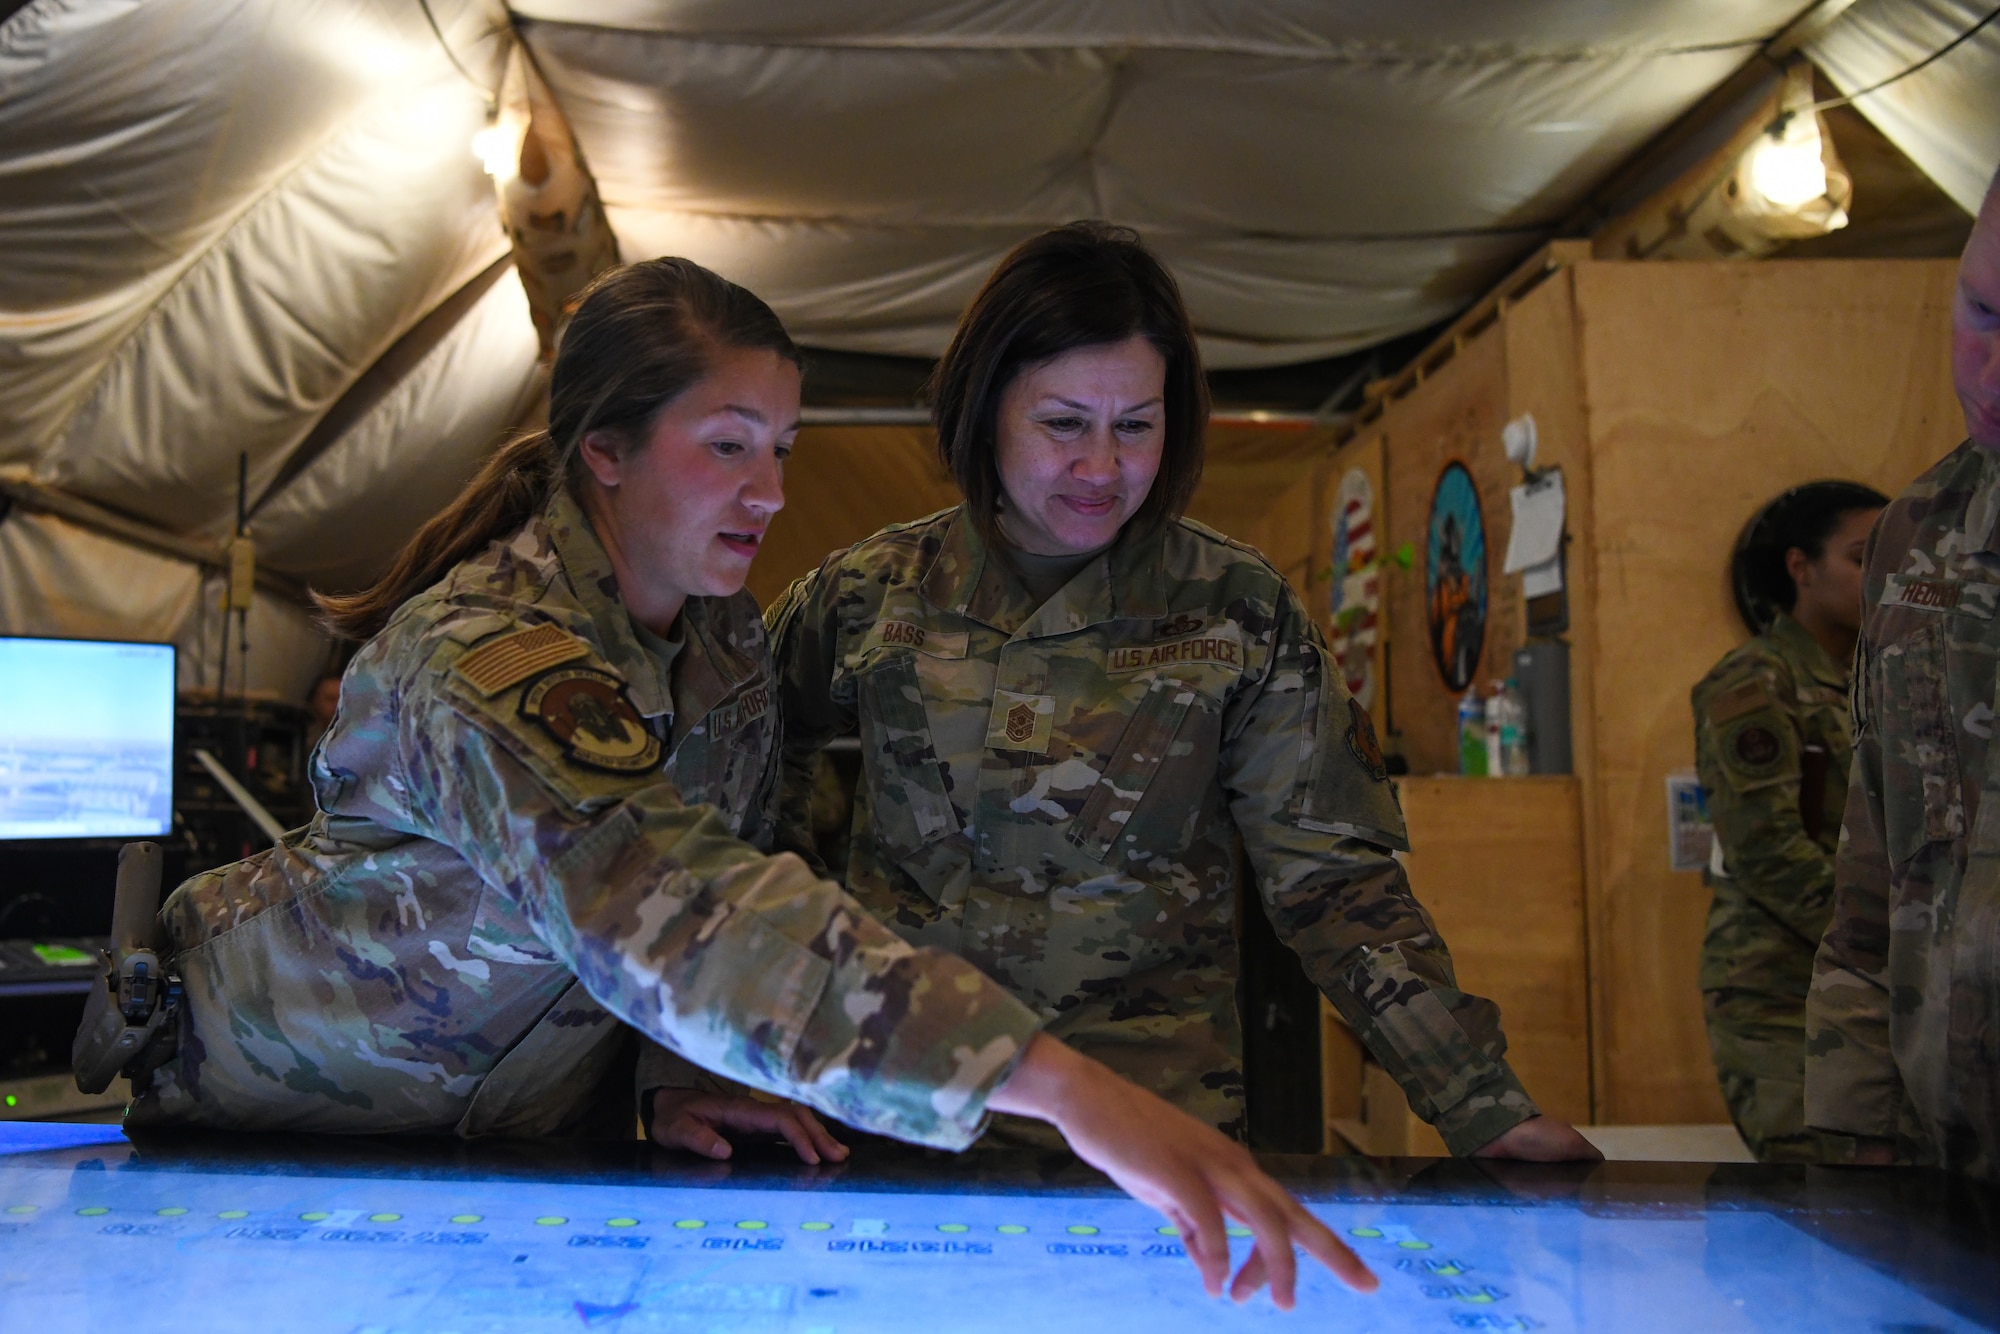 Senior Airman Madison Mortiz, 409th Expeditionary Security Forces Squadron (SFS) member, briefs Chief Master Sgt. of the Air Force JoAnne S. Bass about the Windows Team Assistance Kit (WinTAK) system at Nigerien Air Base 201, Agadez, Dec. 20, 2021. The WinTAK provides SFS members the ability to have increased situational awareness within the immediate area to ensure continued air operations. (U.S. Air Force photo by Senior Airman Ericka A. Woolever)